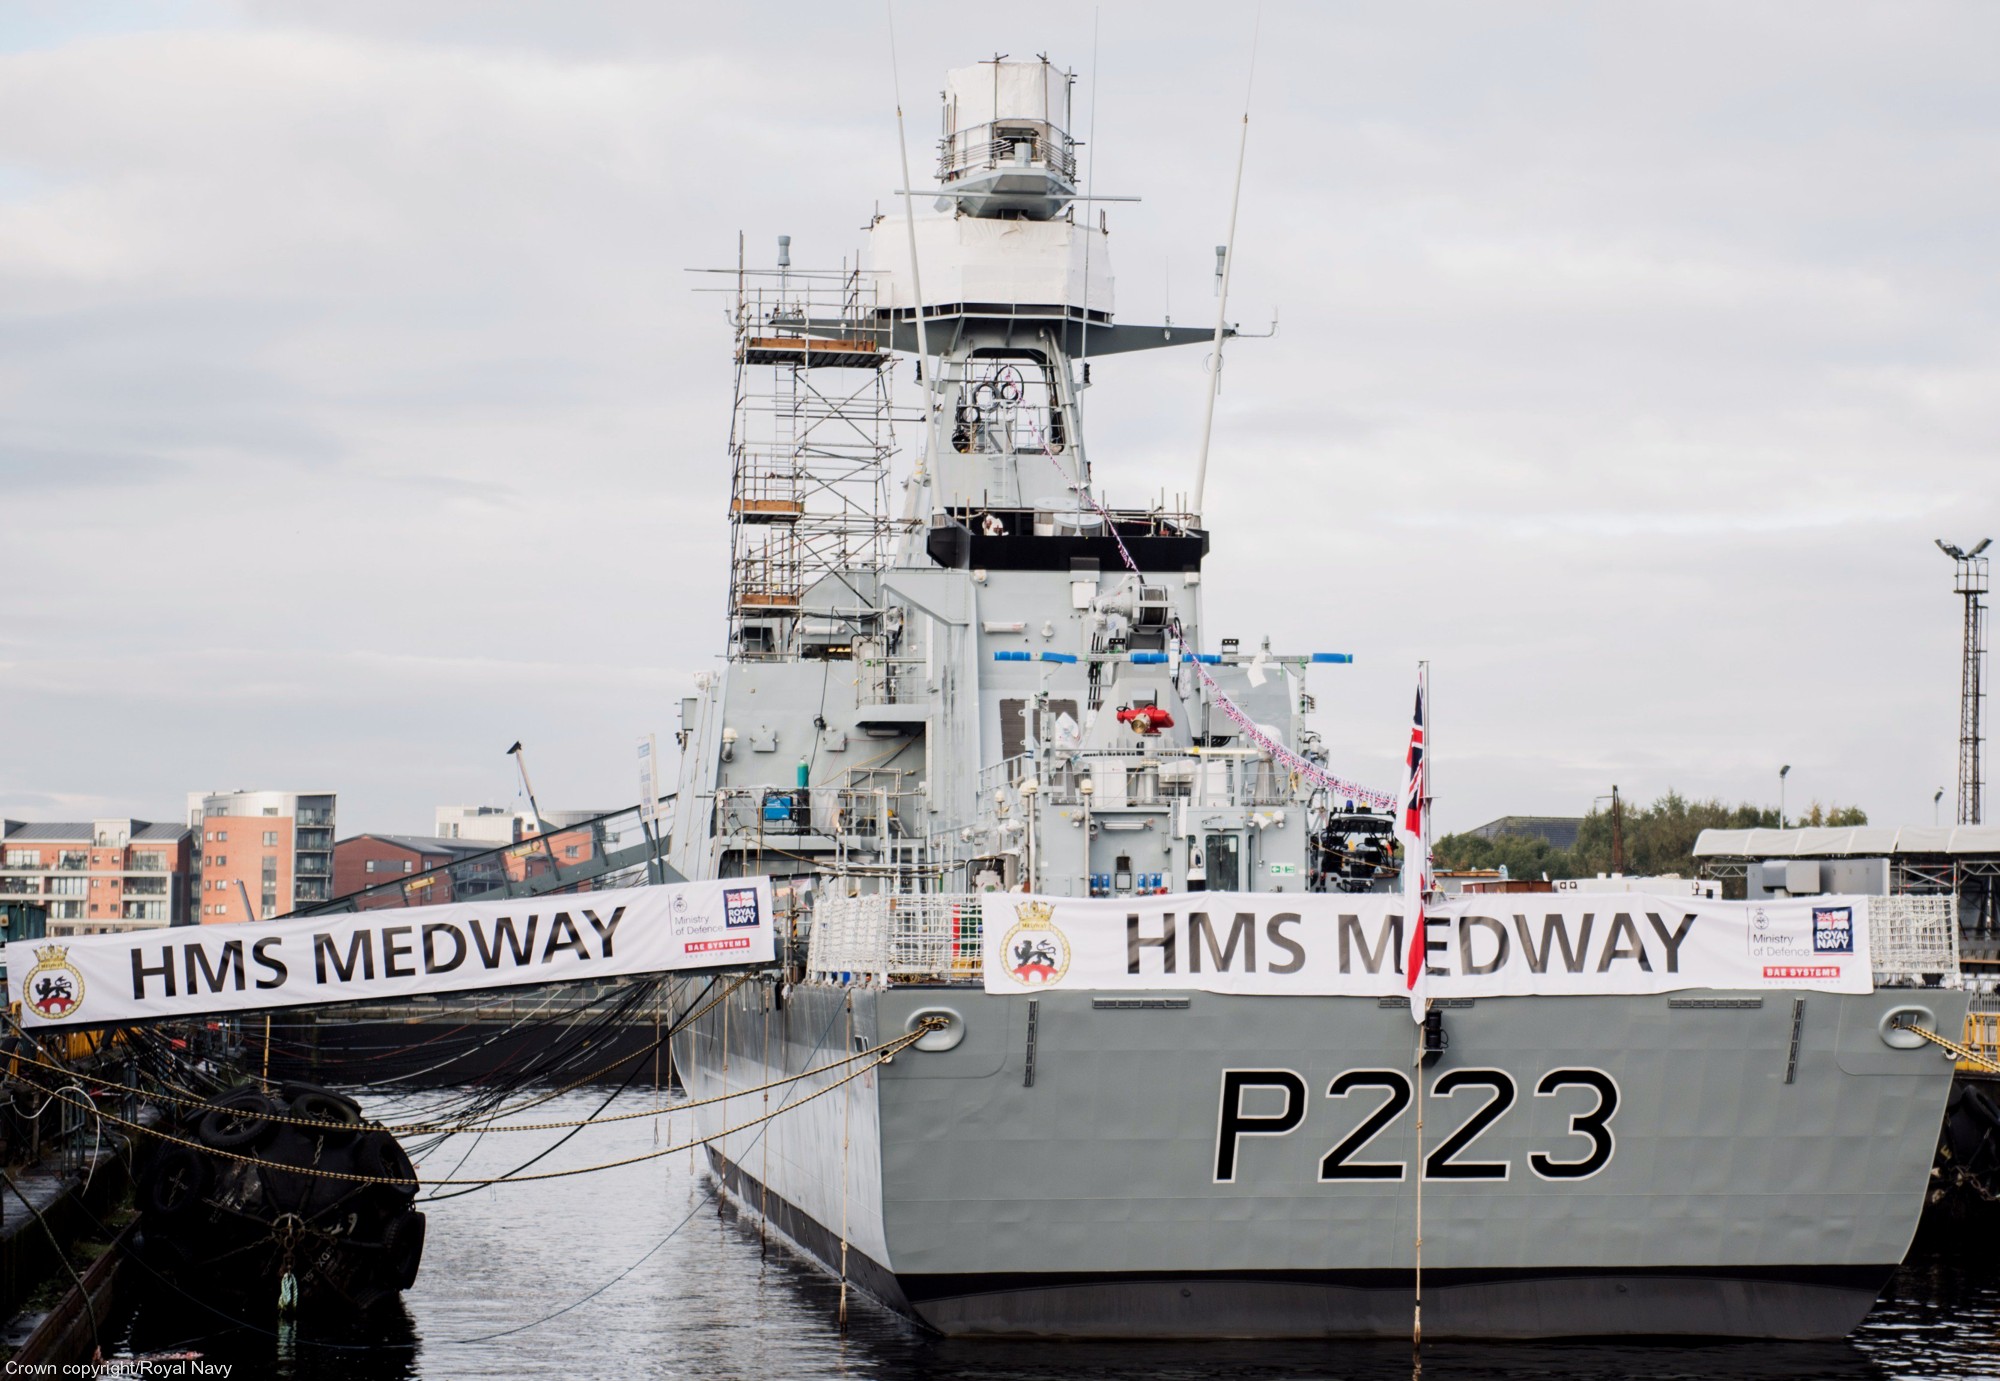 p223 hms medway insignia crest patch badge river class offshore patrol vessel opv royal navy 08